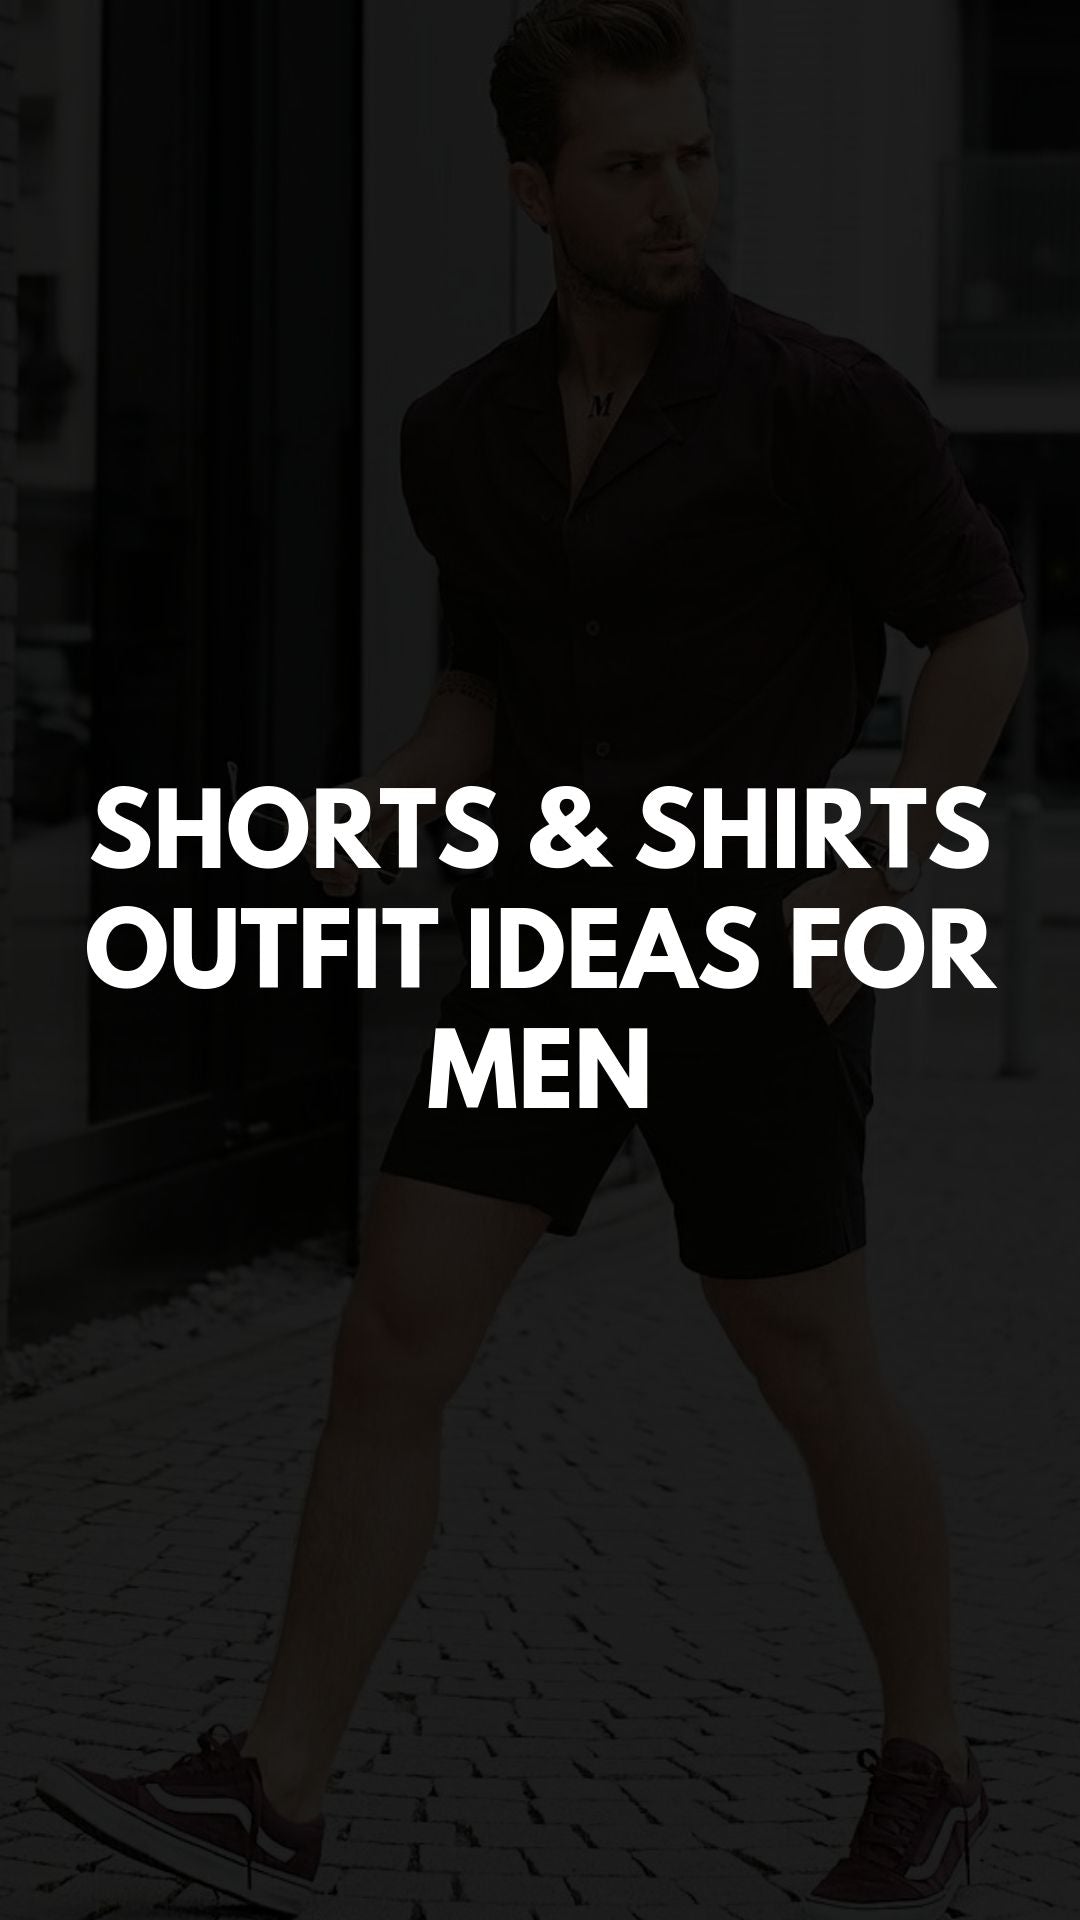 5 Dashing Shorts & Shirt Outfit Ideas For Men – LIFESTYLE BY PS